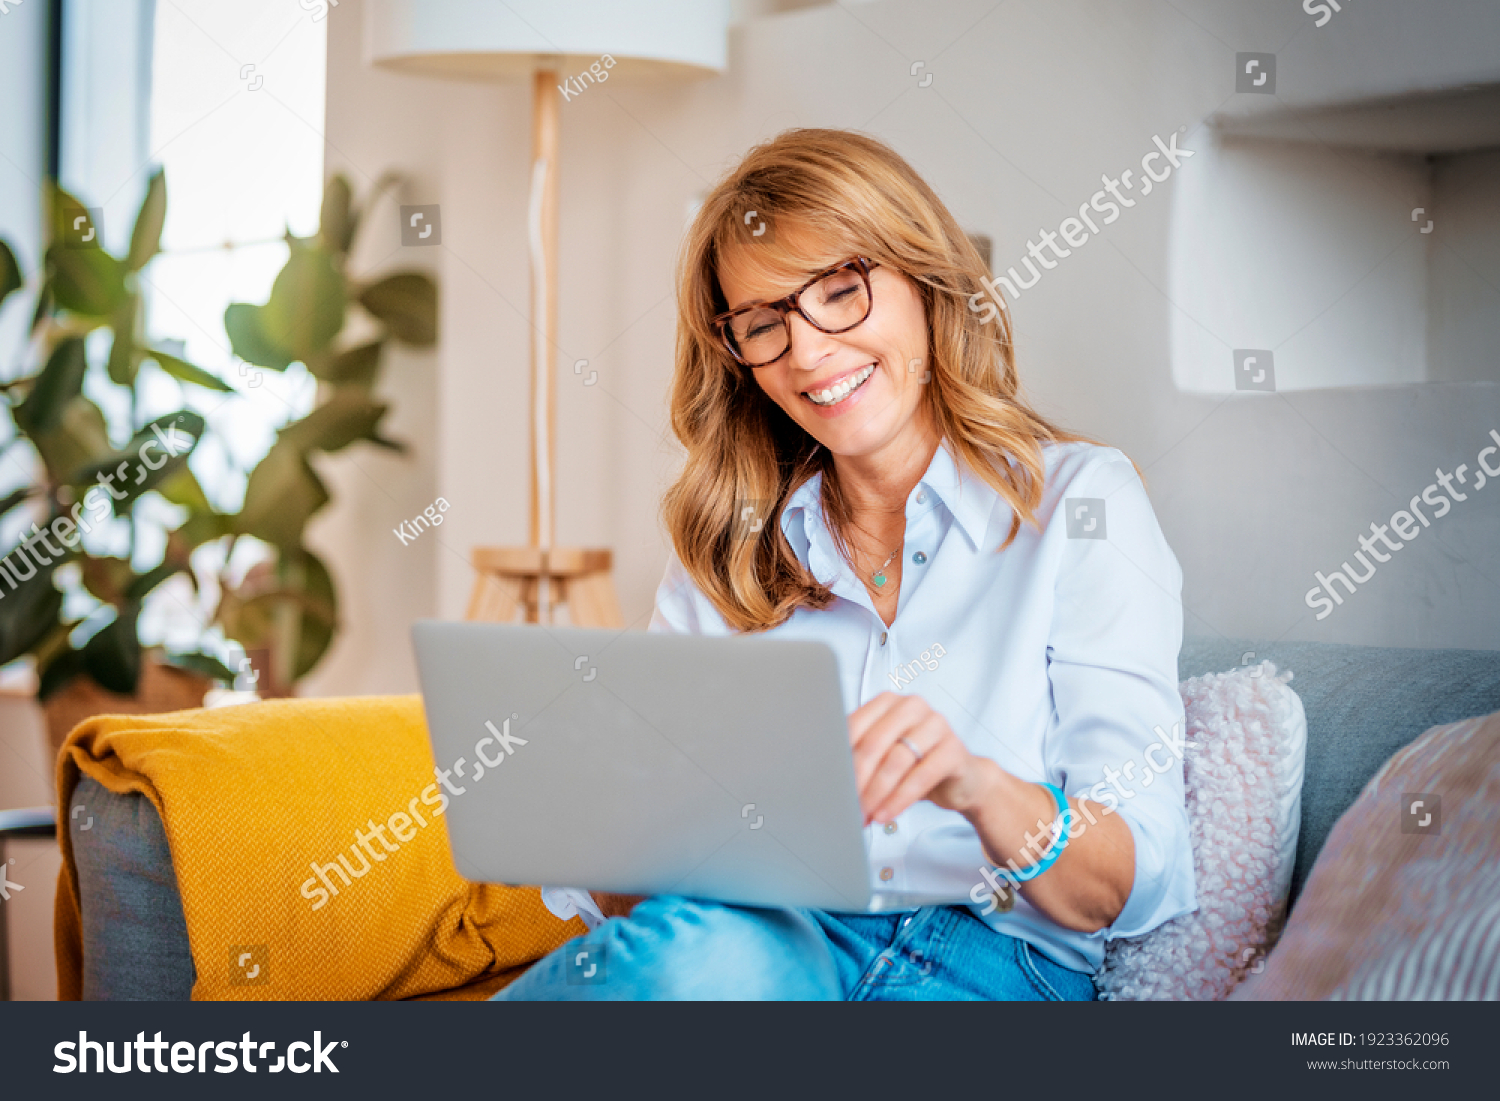 Shot of a happy middle aged woman using her laptop on the sofa at home.  #1923362096